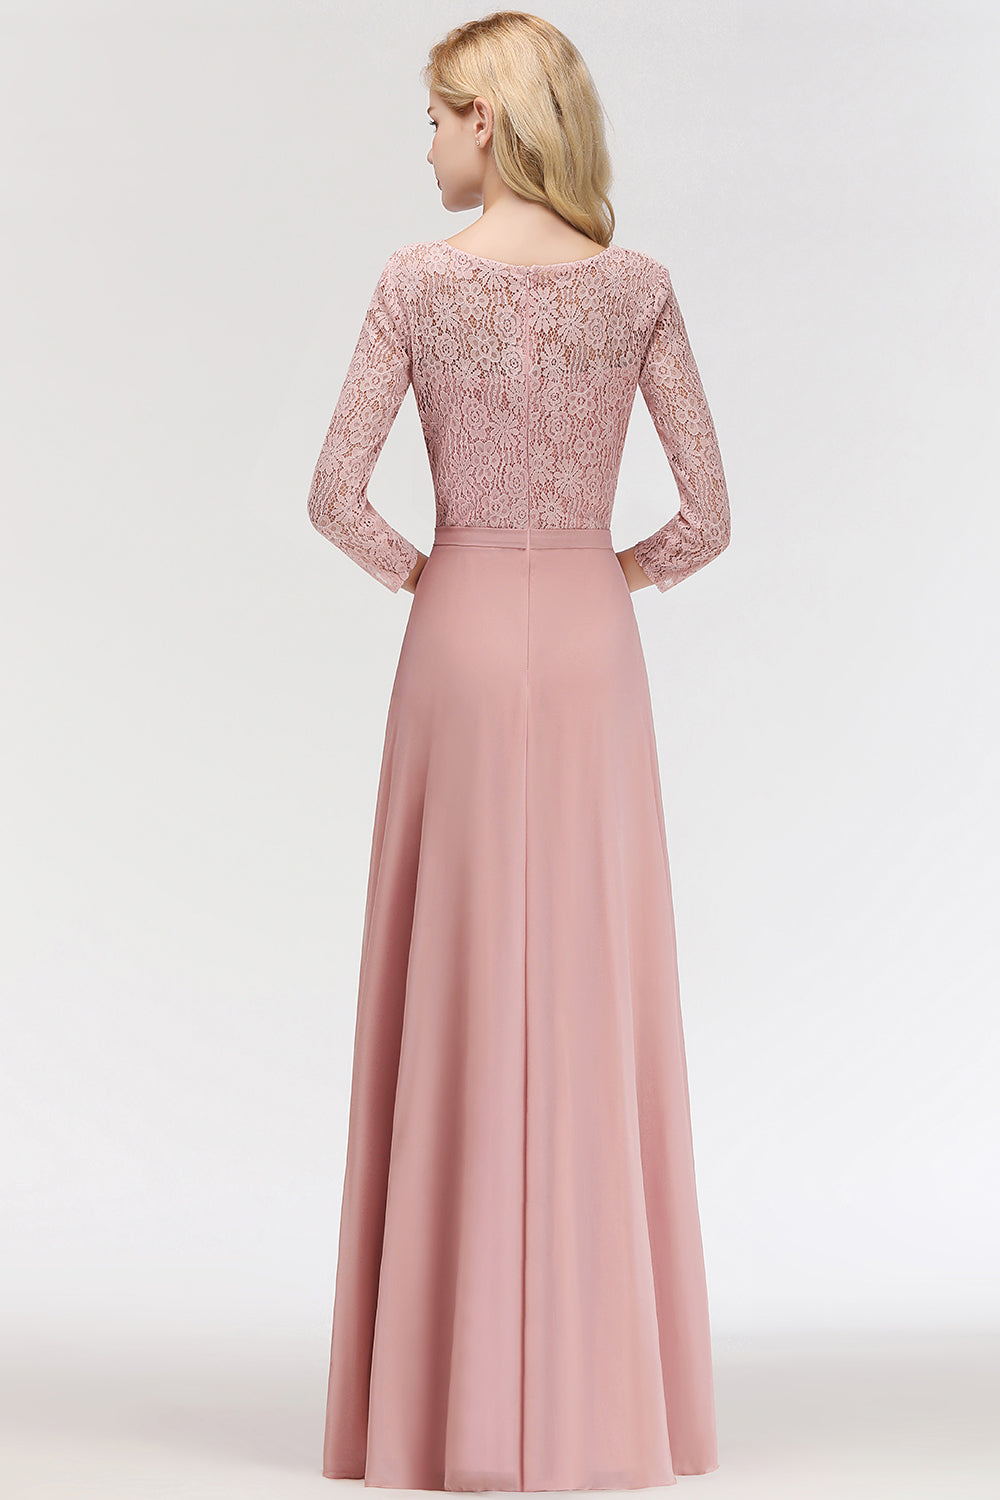 Pink Lace Long Evening Dresses with Sleeves | A-Line Scoop Bridesmaid Dresses